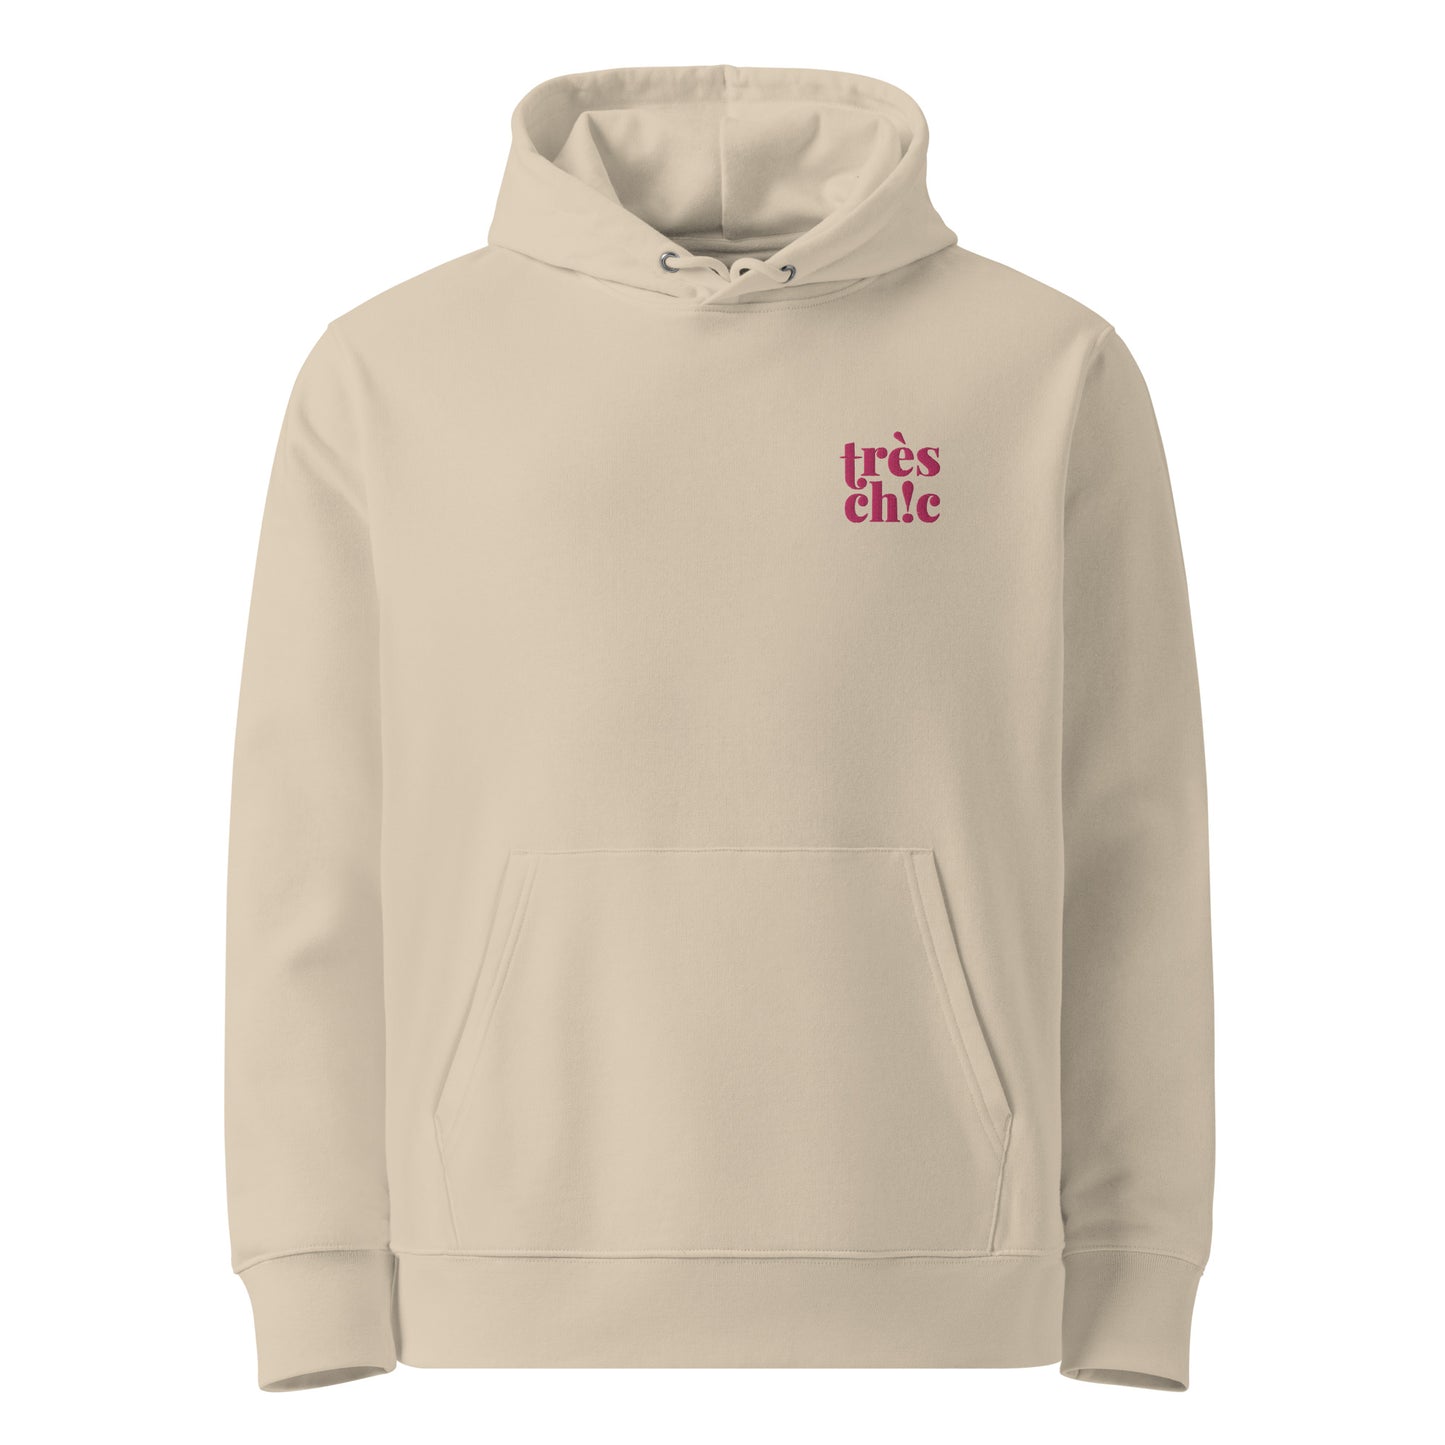 Unisex eco-friendly desert dust hoodie featuring on the upper left chest; Trés Chic embroidery in hot pink color, adding a touch of lgbtq to your outfit. sizes: small, medium, large, extra large, double extra large.